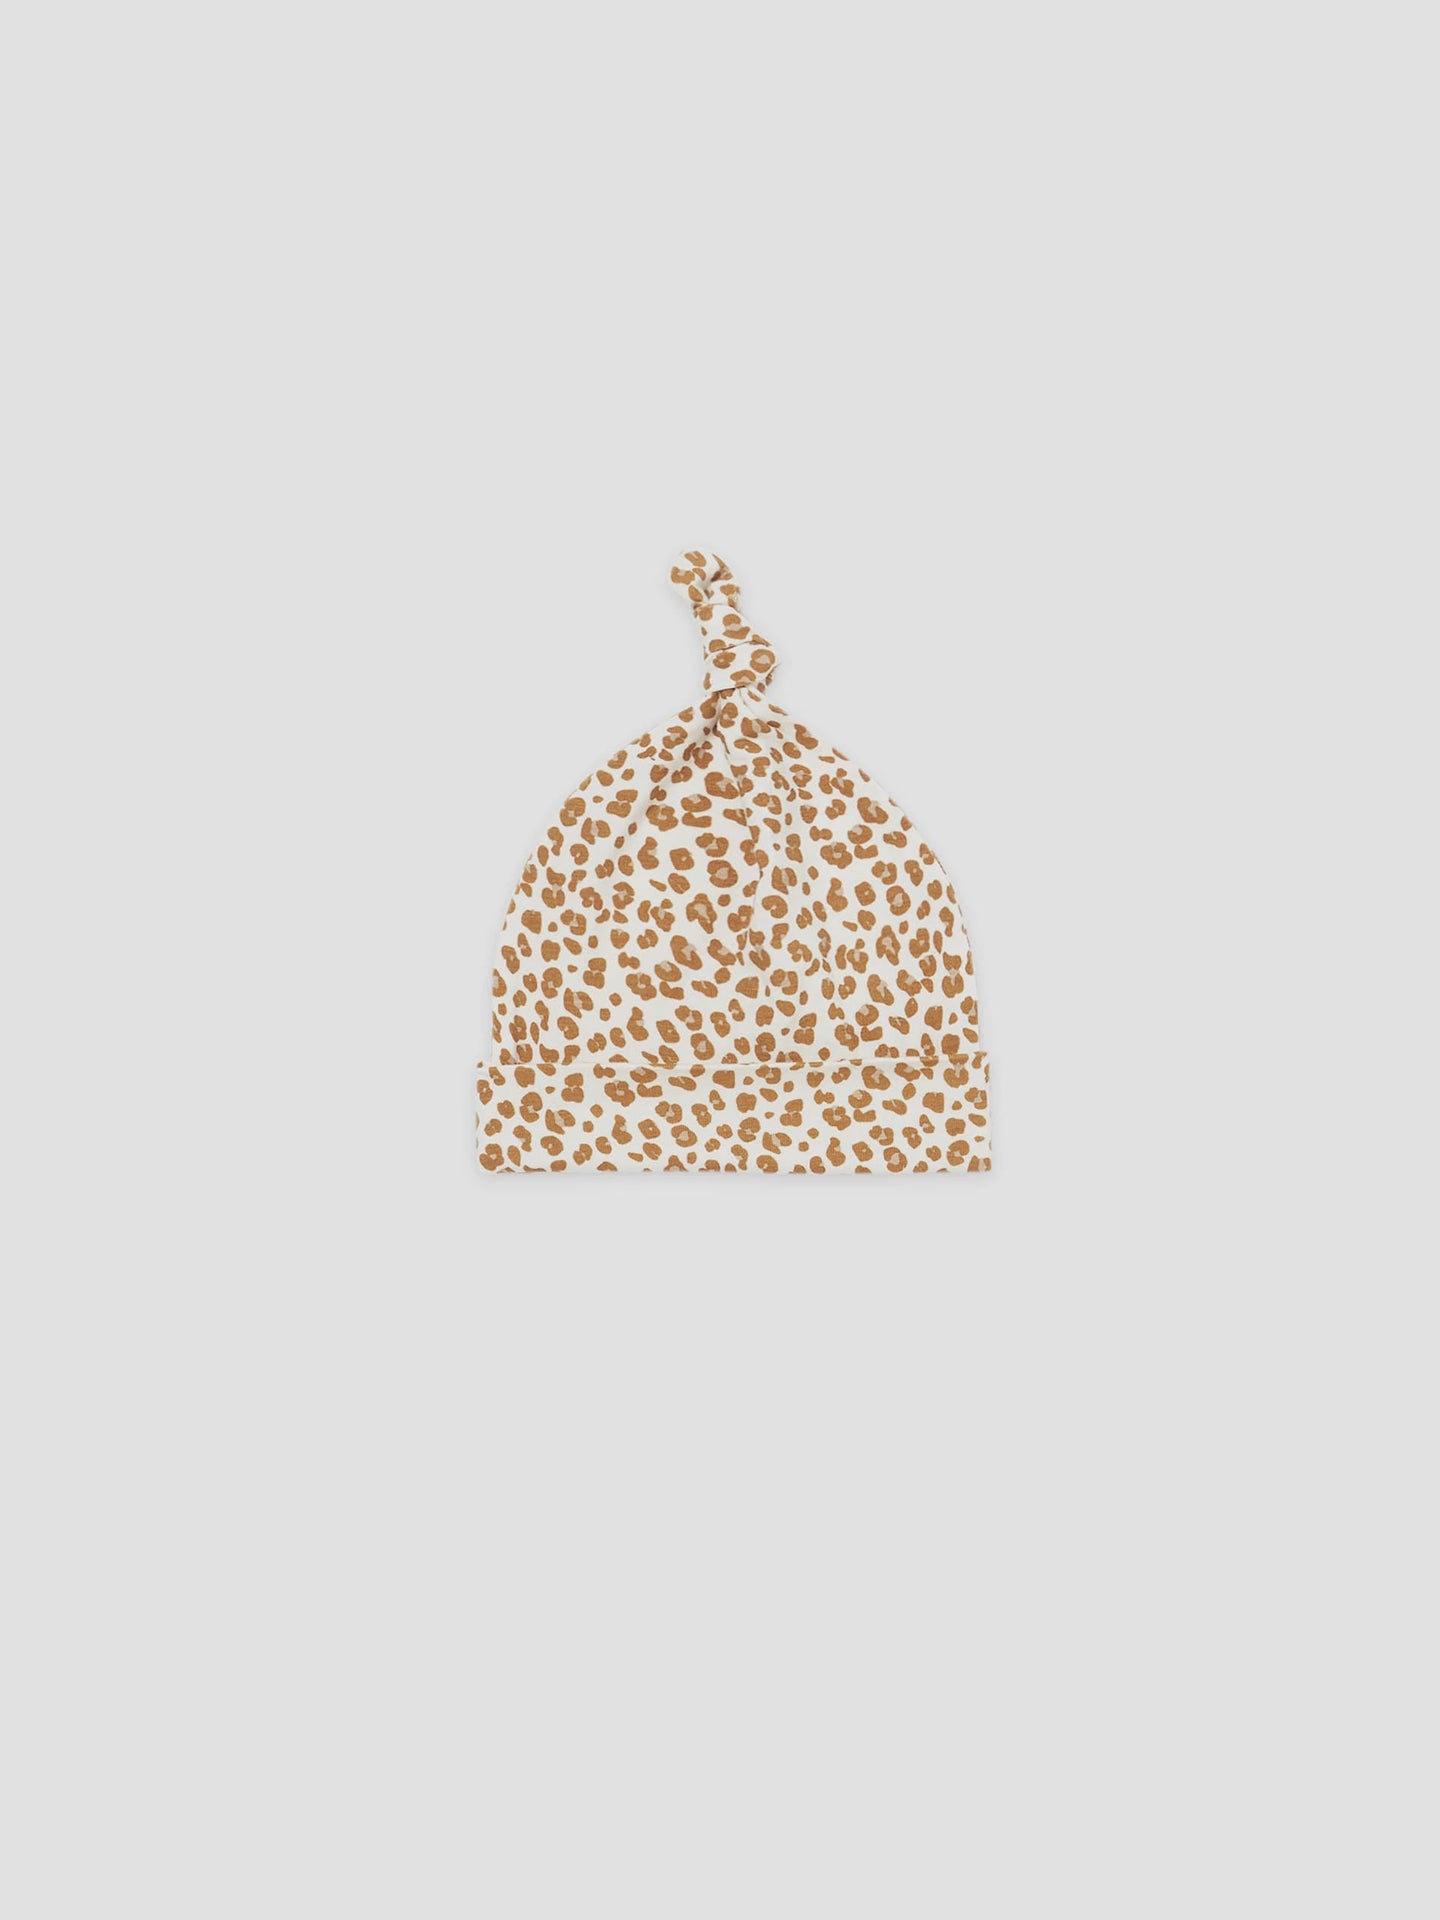 Quincy Mae - Knotted Baby Hat - Cheetah